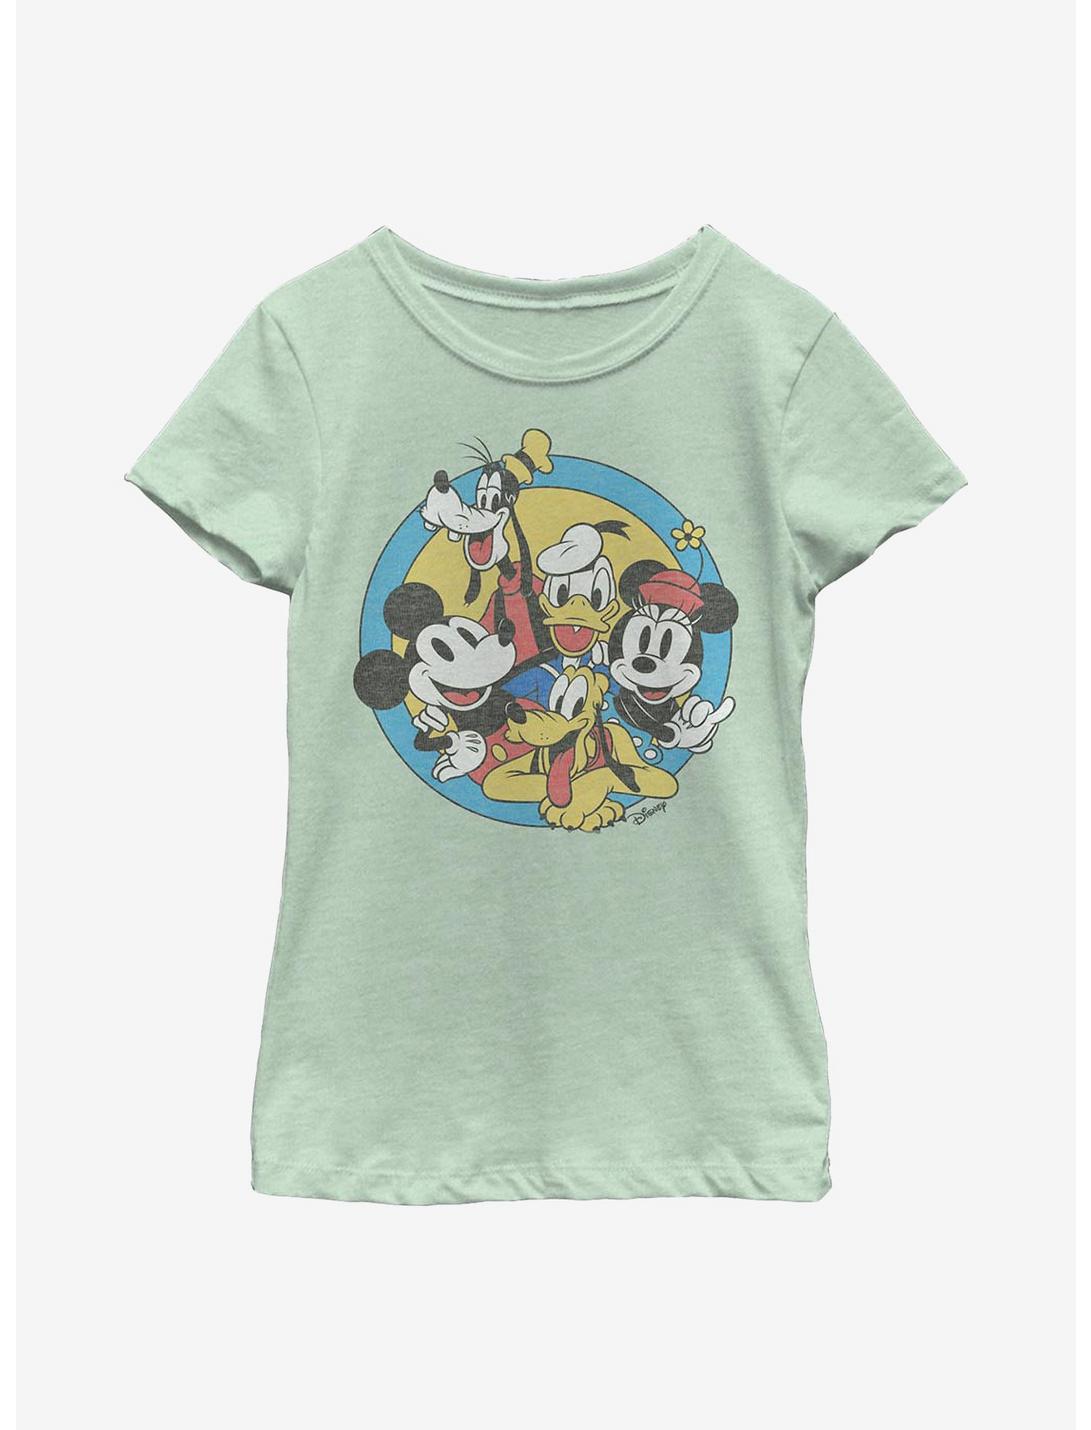 Disney Mickey Mouse Fab Five Friends Youth Girls T-Shirt, MINT, hi-res